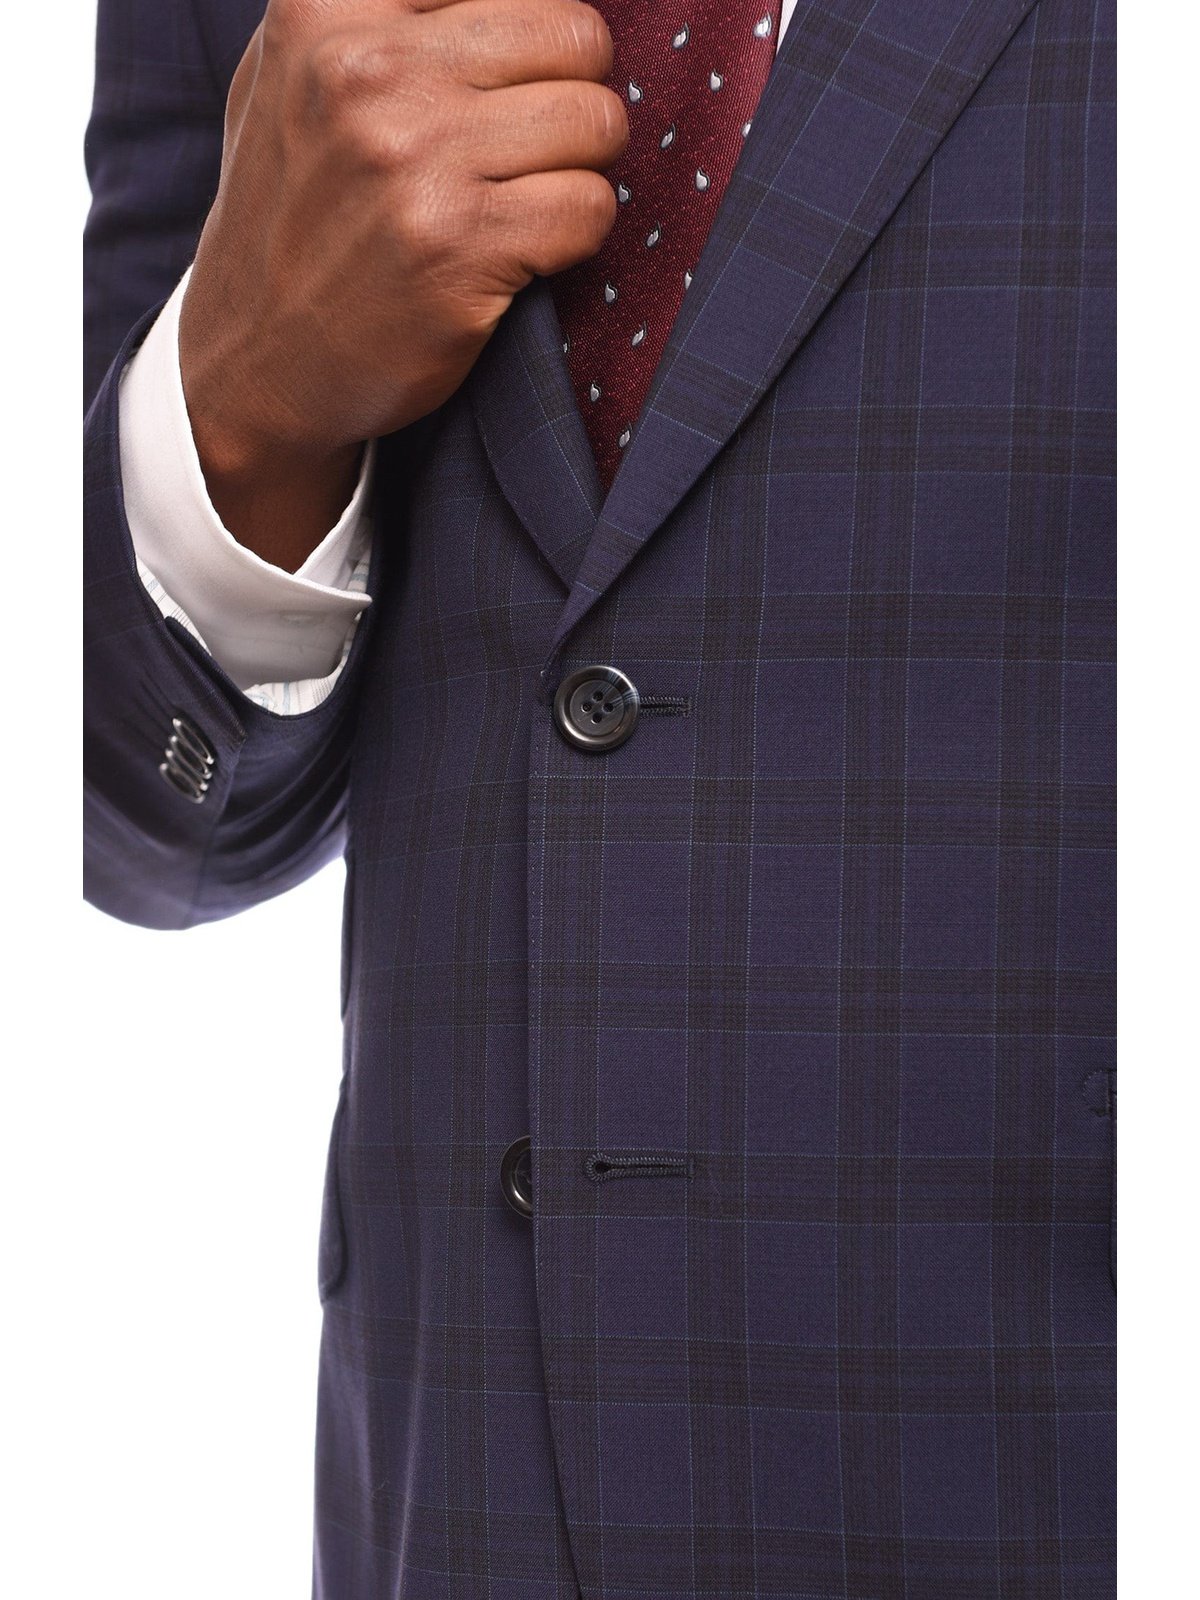 Napoli TWO PIECE SUITS Napoli Slim Fit Navy Blue Plaid Half Canvassed Wool Suit With Wide Peak Lapels